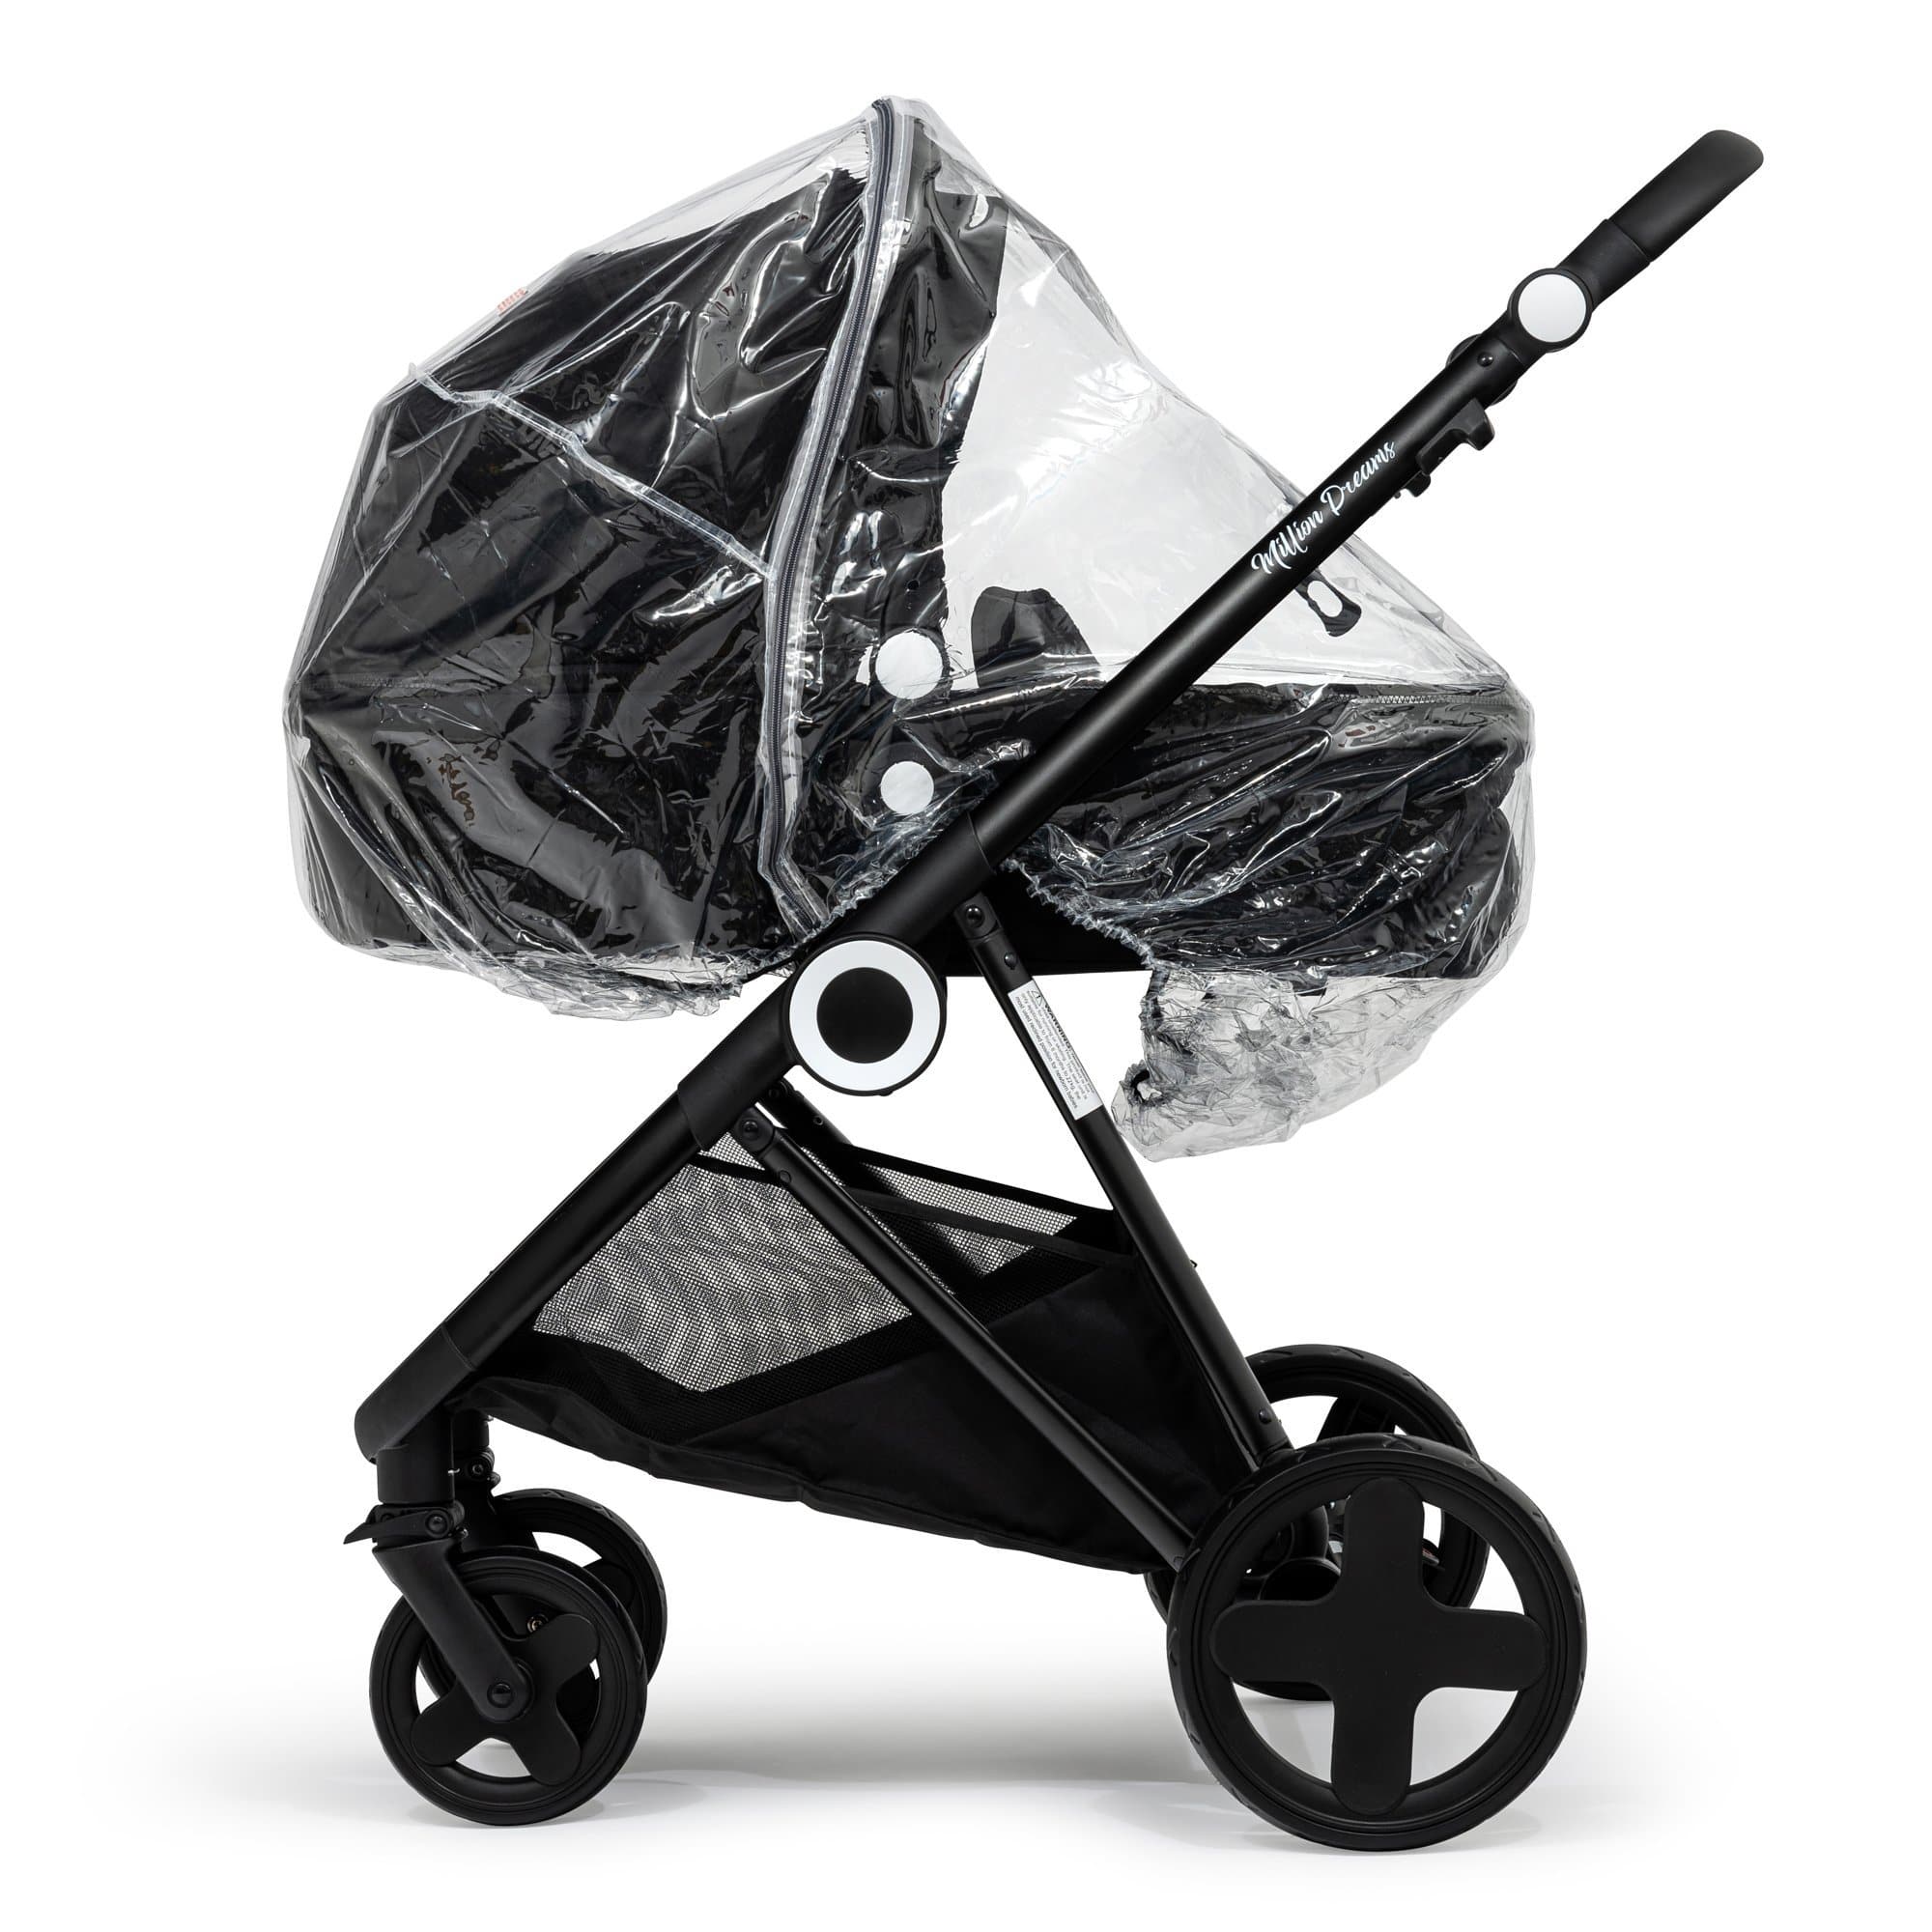 2 in 1 Rain Cover Compatible with Pericles - Fits All Models - For Your Little One